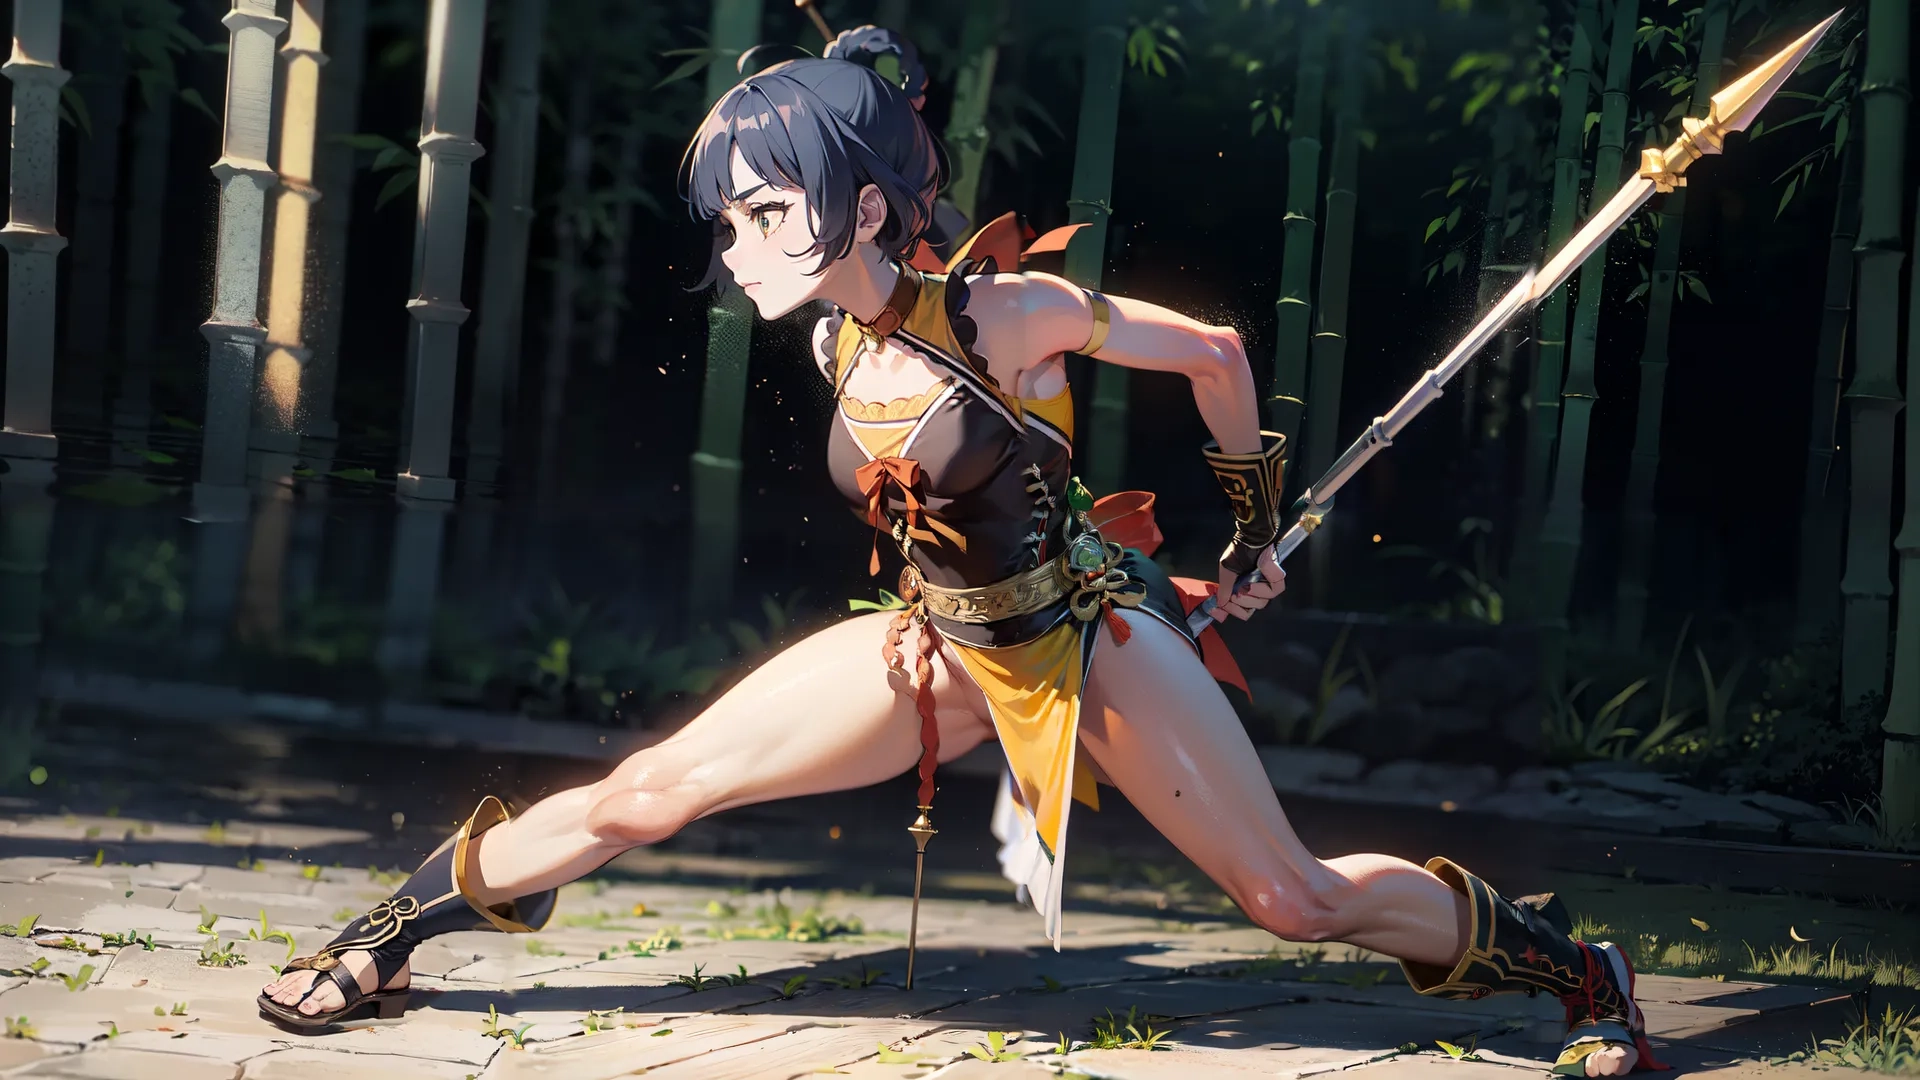 woman with sword posing on brick path by bamboo fence, with shoes on, and hands crossed, on sunny day surface with sunlight shining
